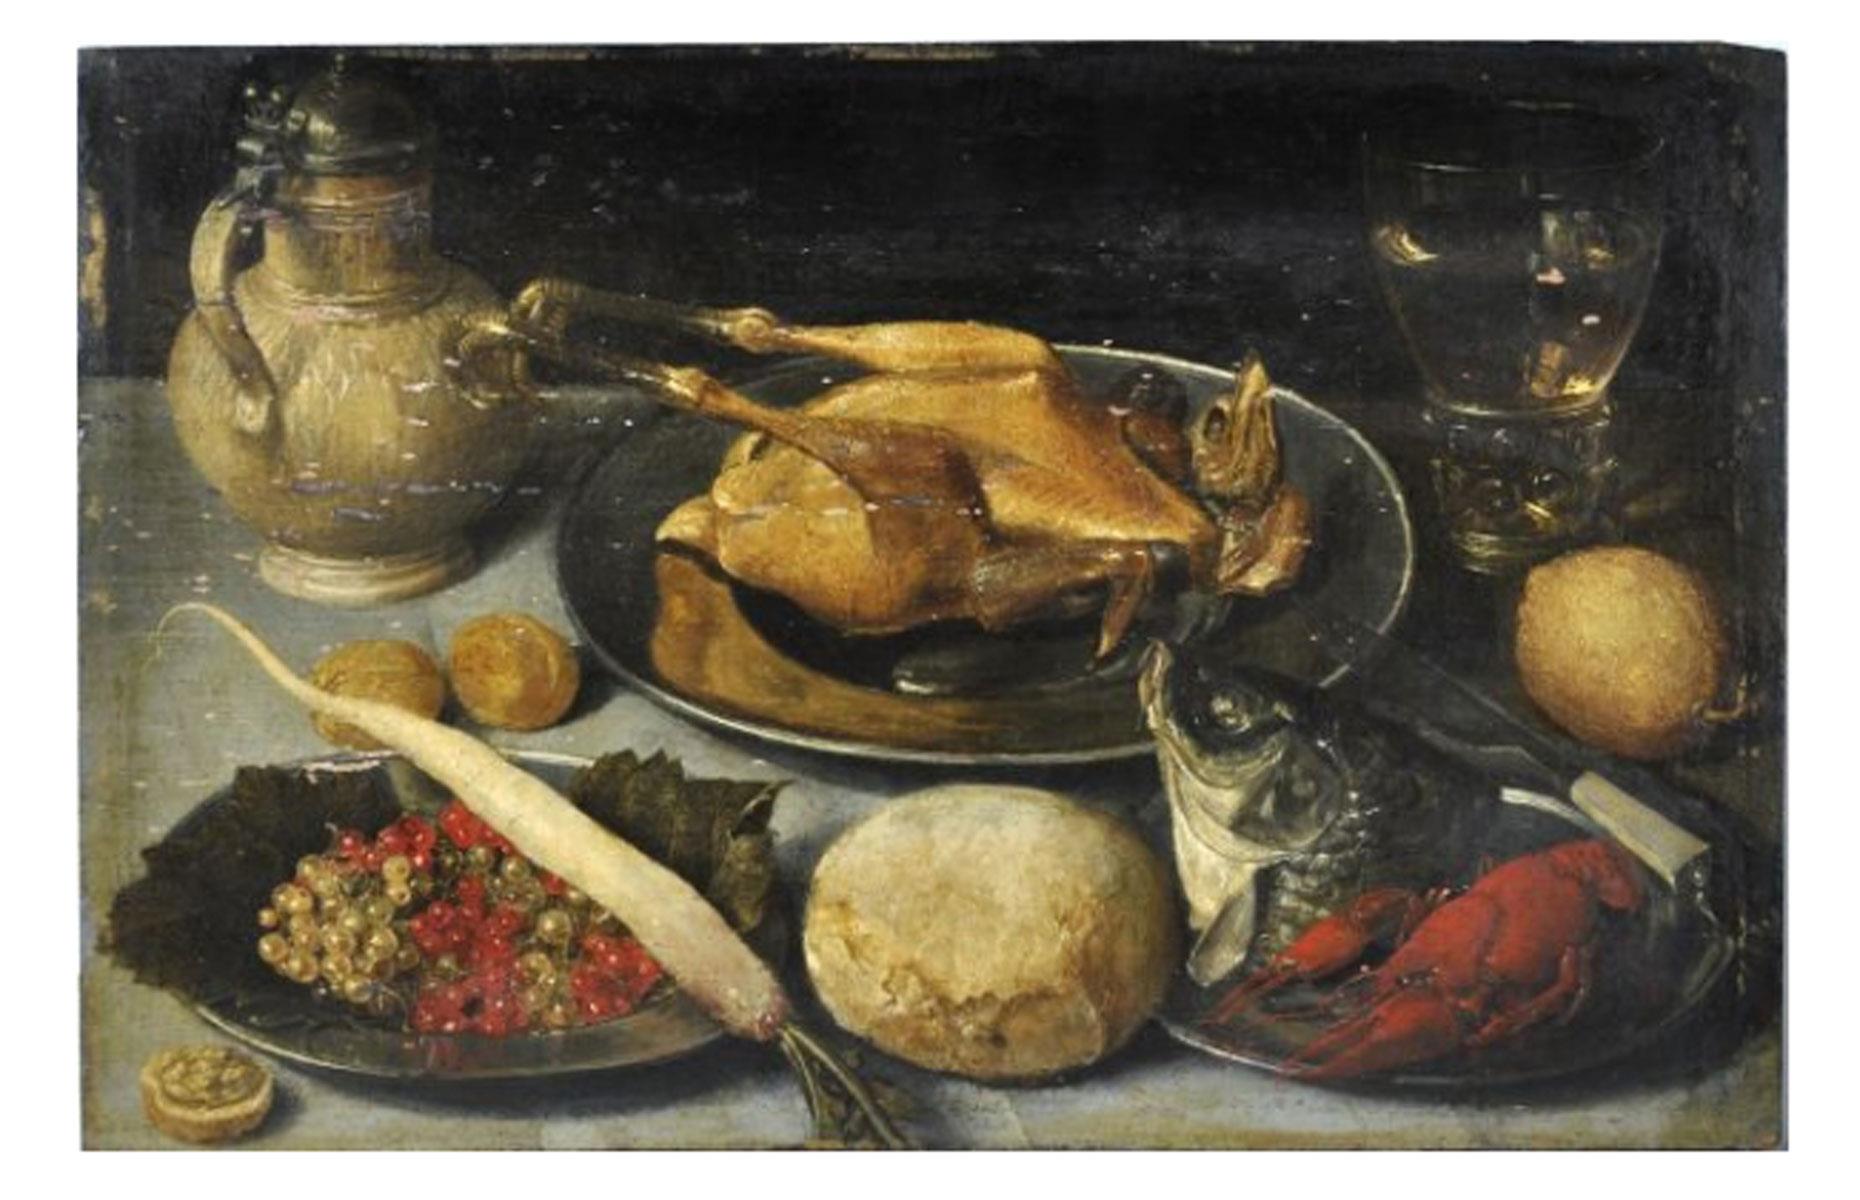 The 17th-century Flemish painting sold for $190,000 (£146k)